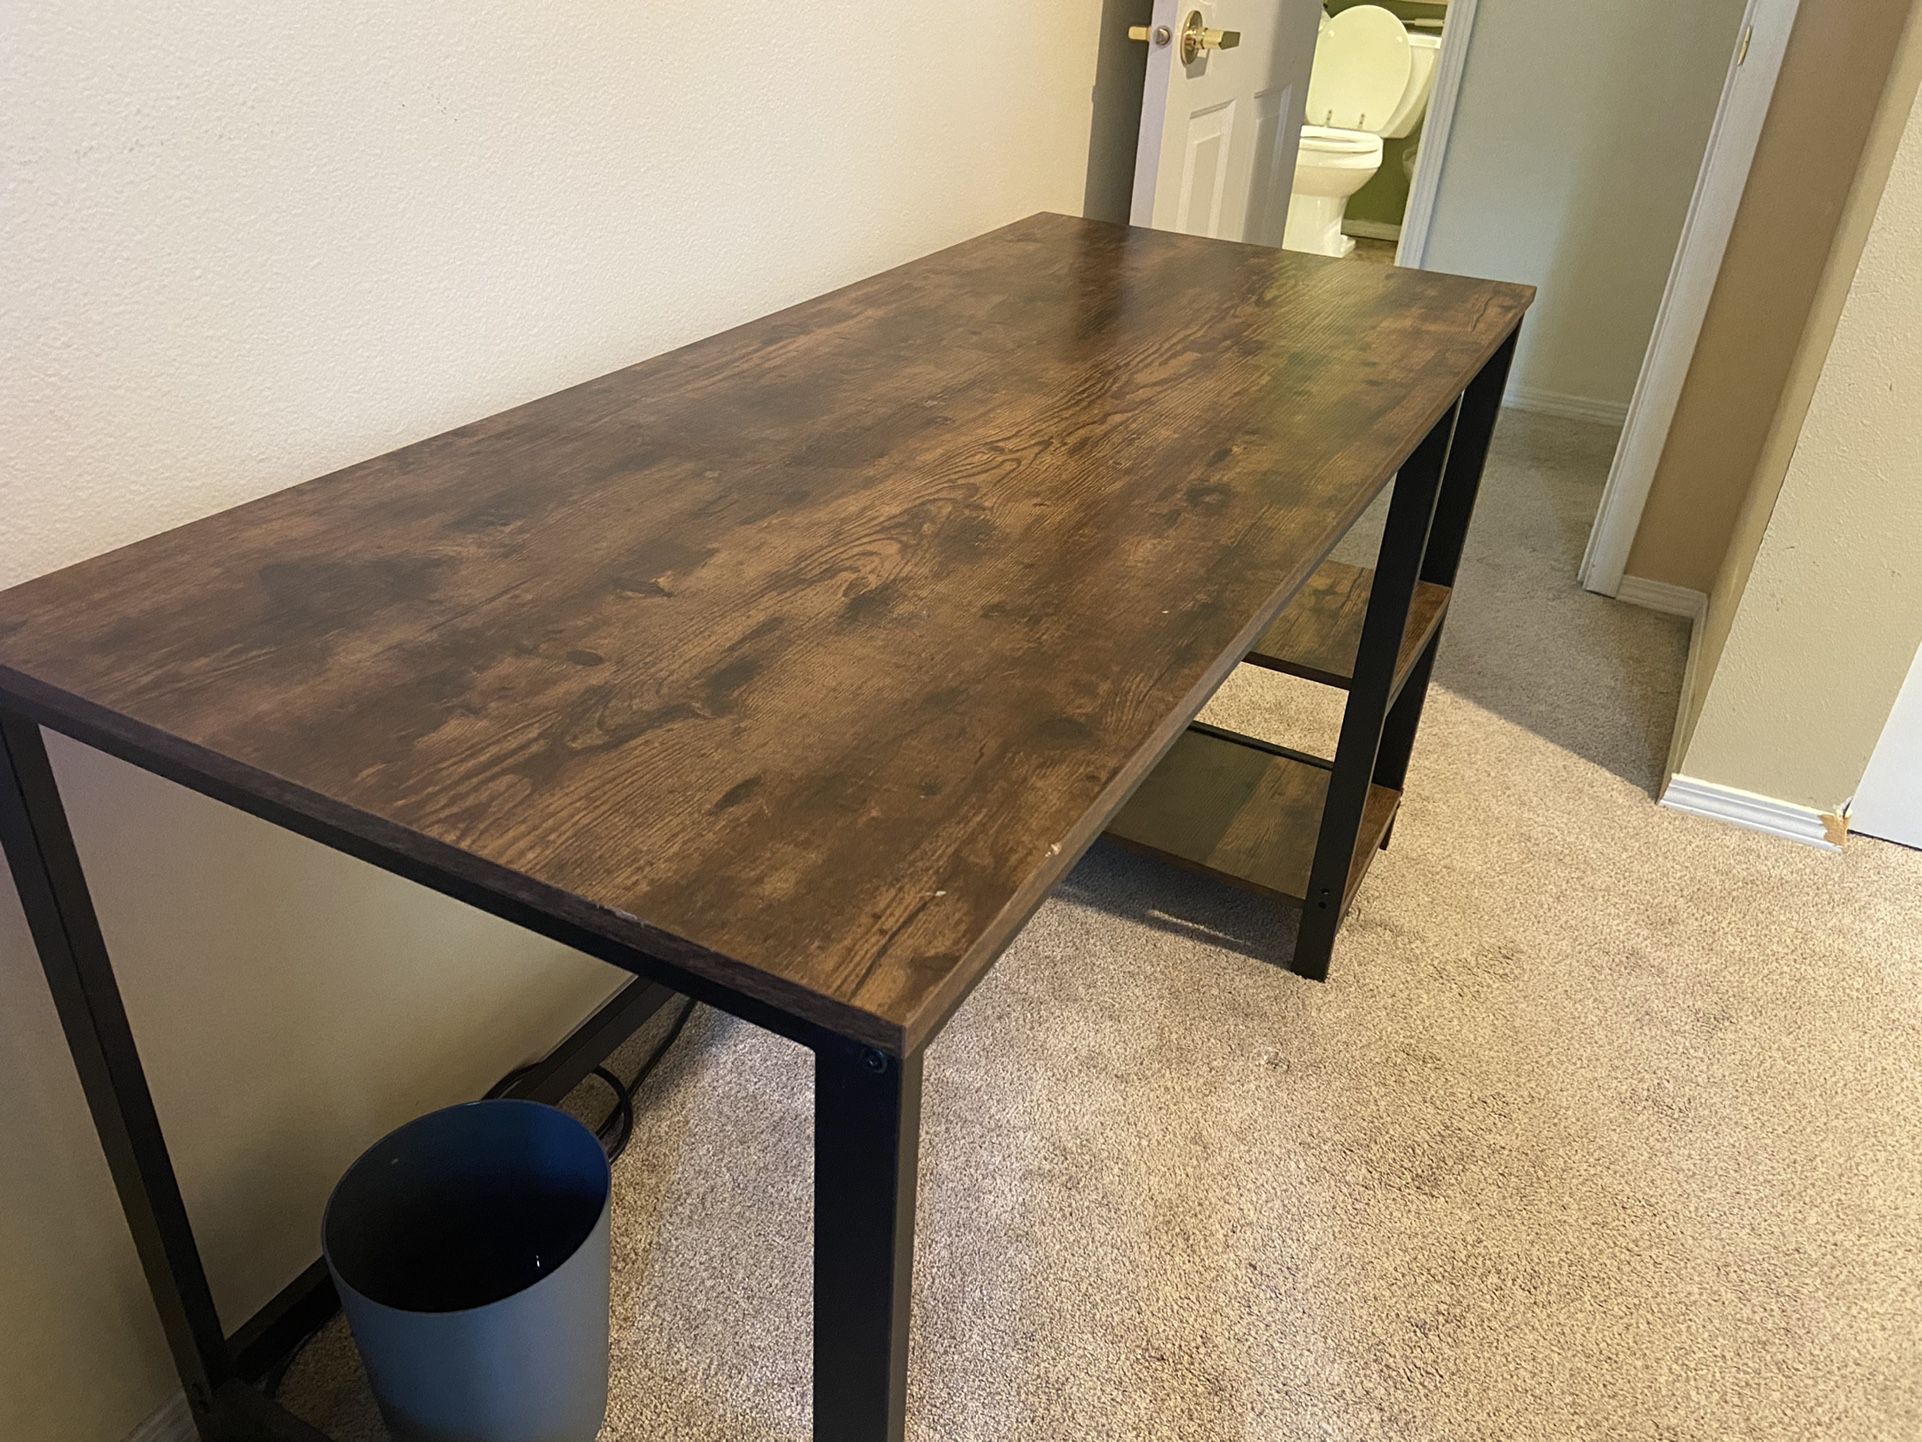 Table with side shelving